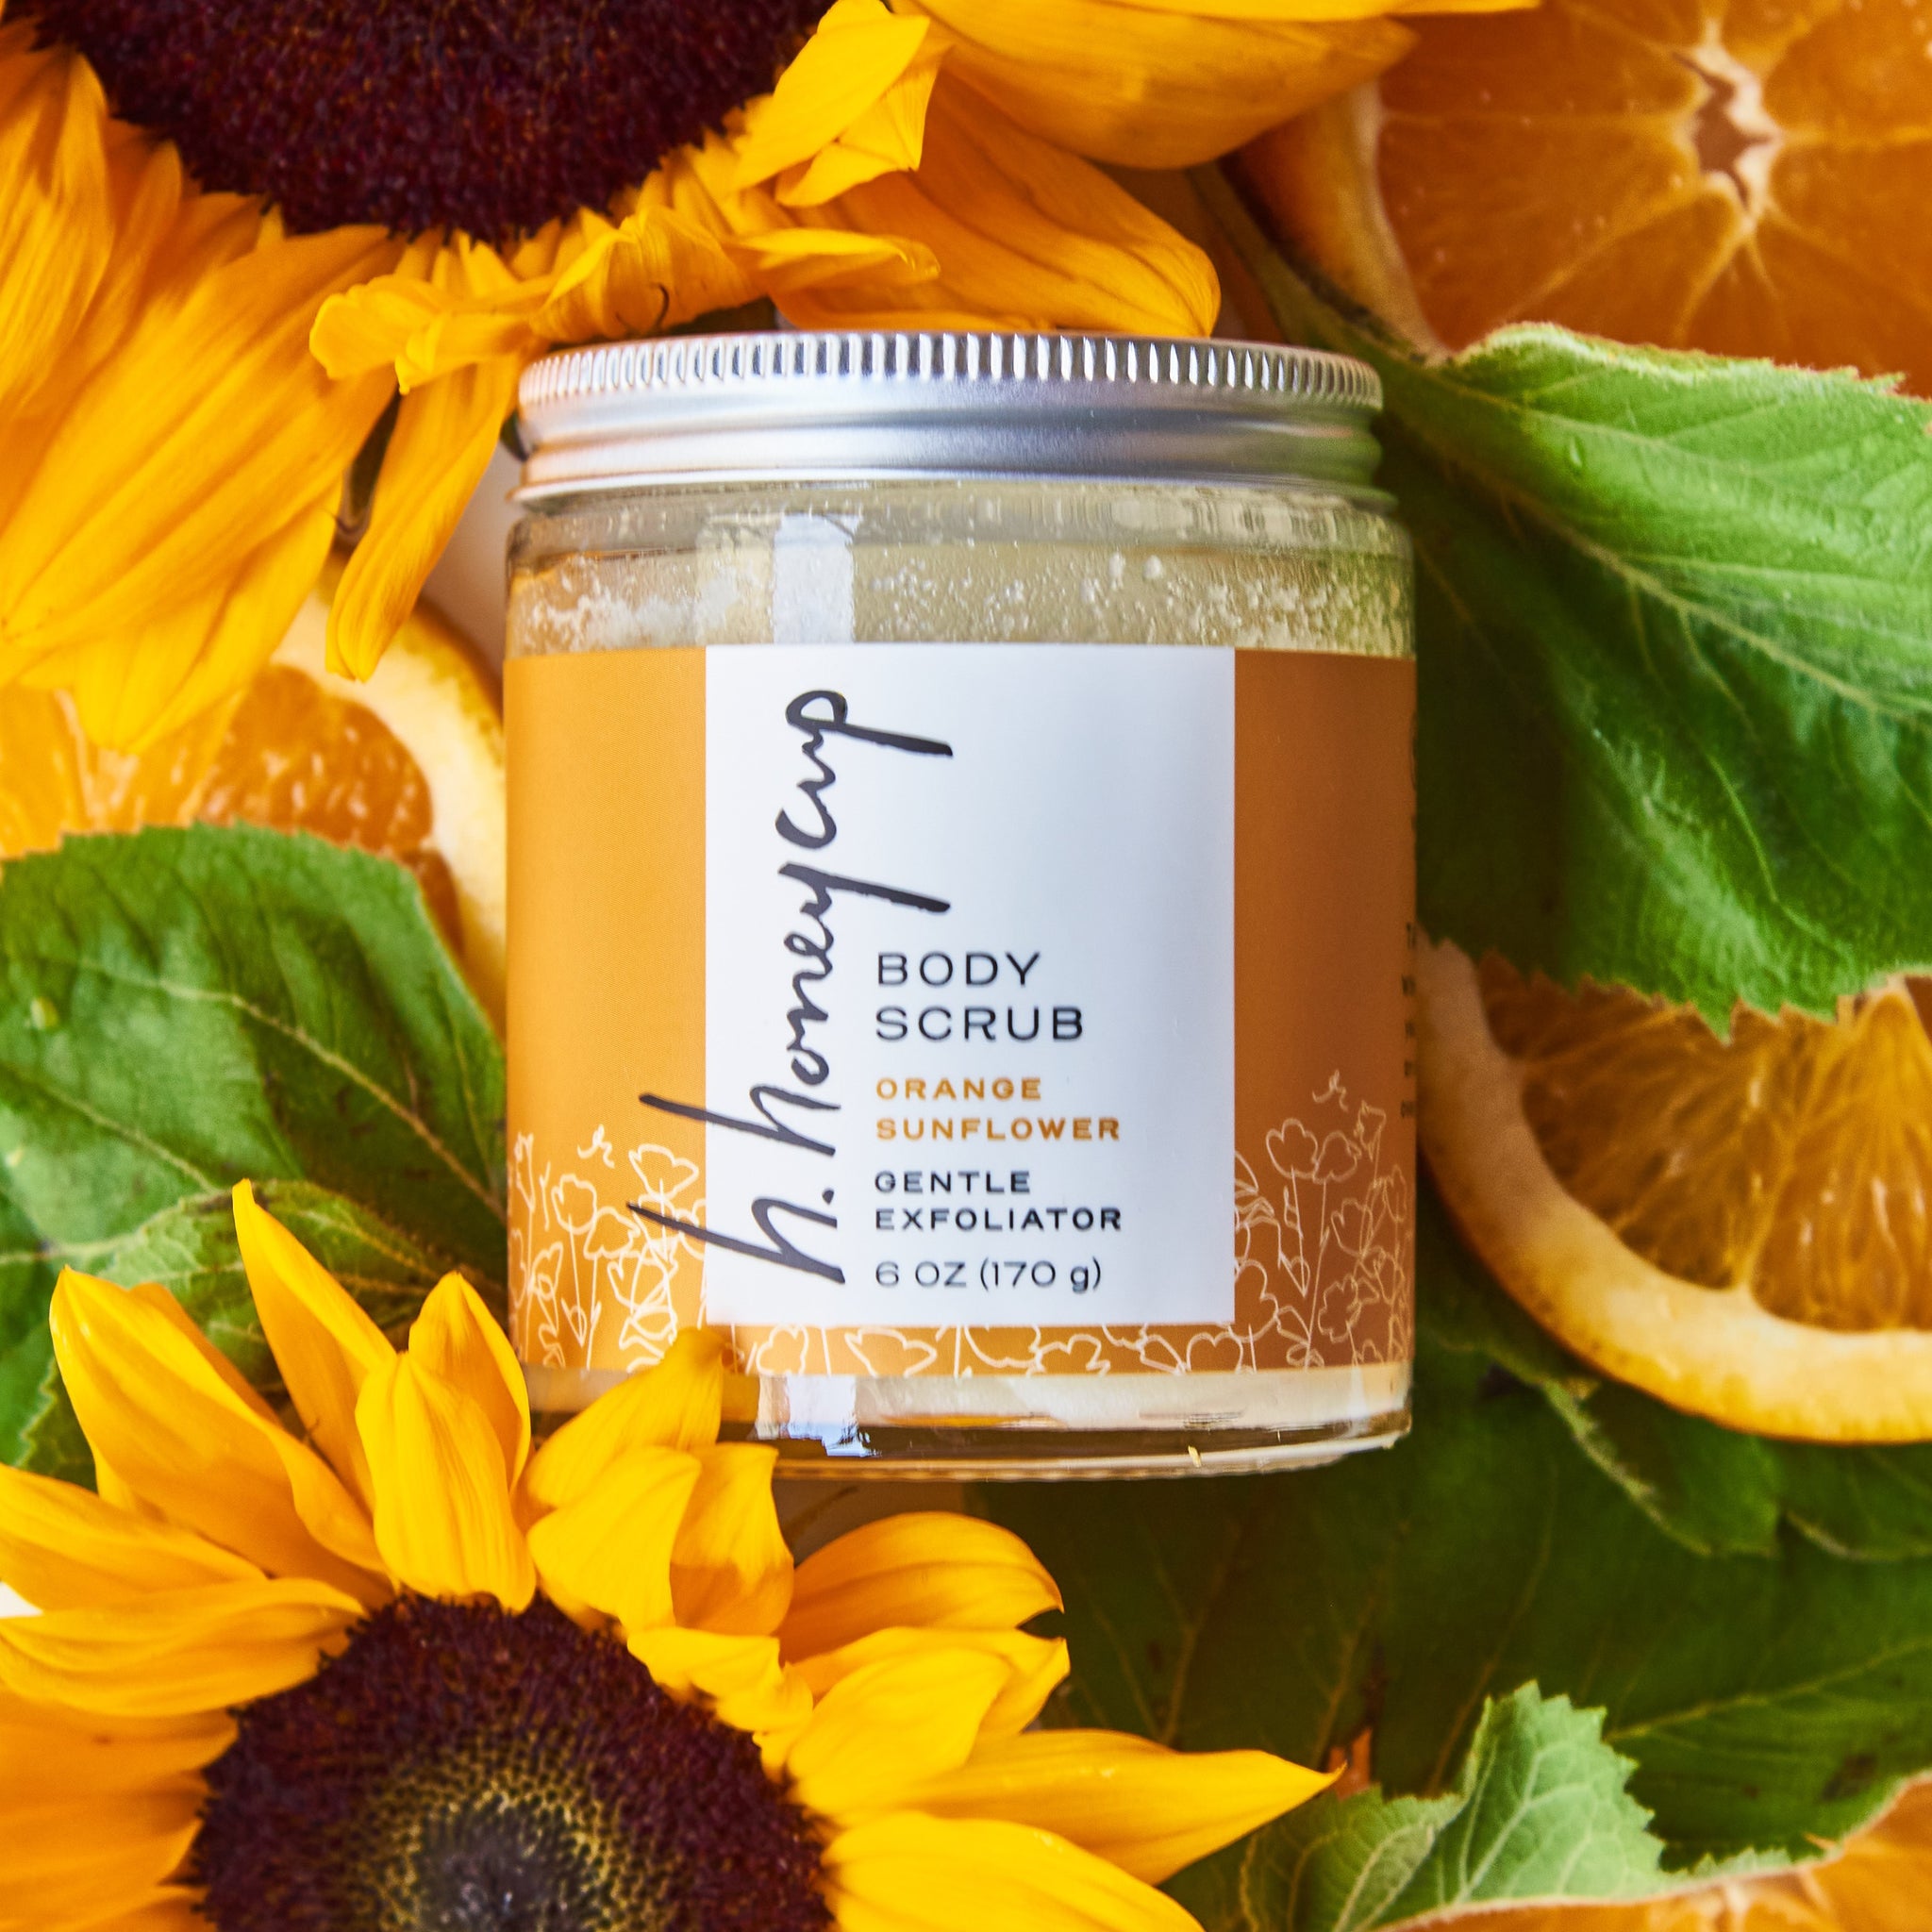 Body scrub surrounded by real oranges and sunflower ingredients